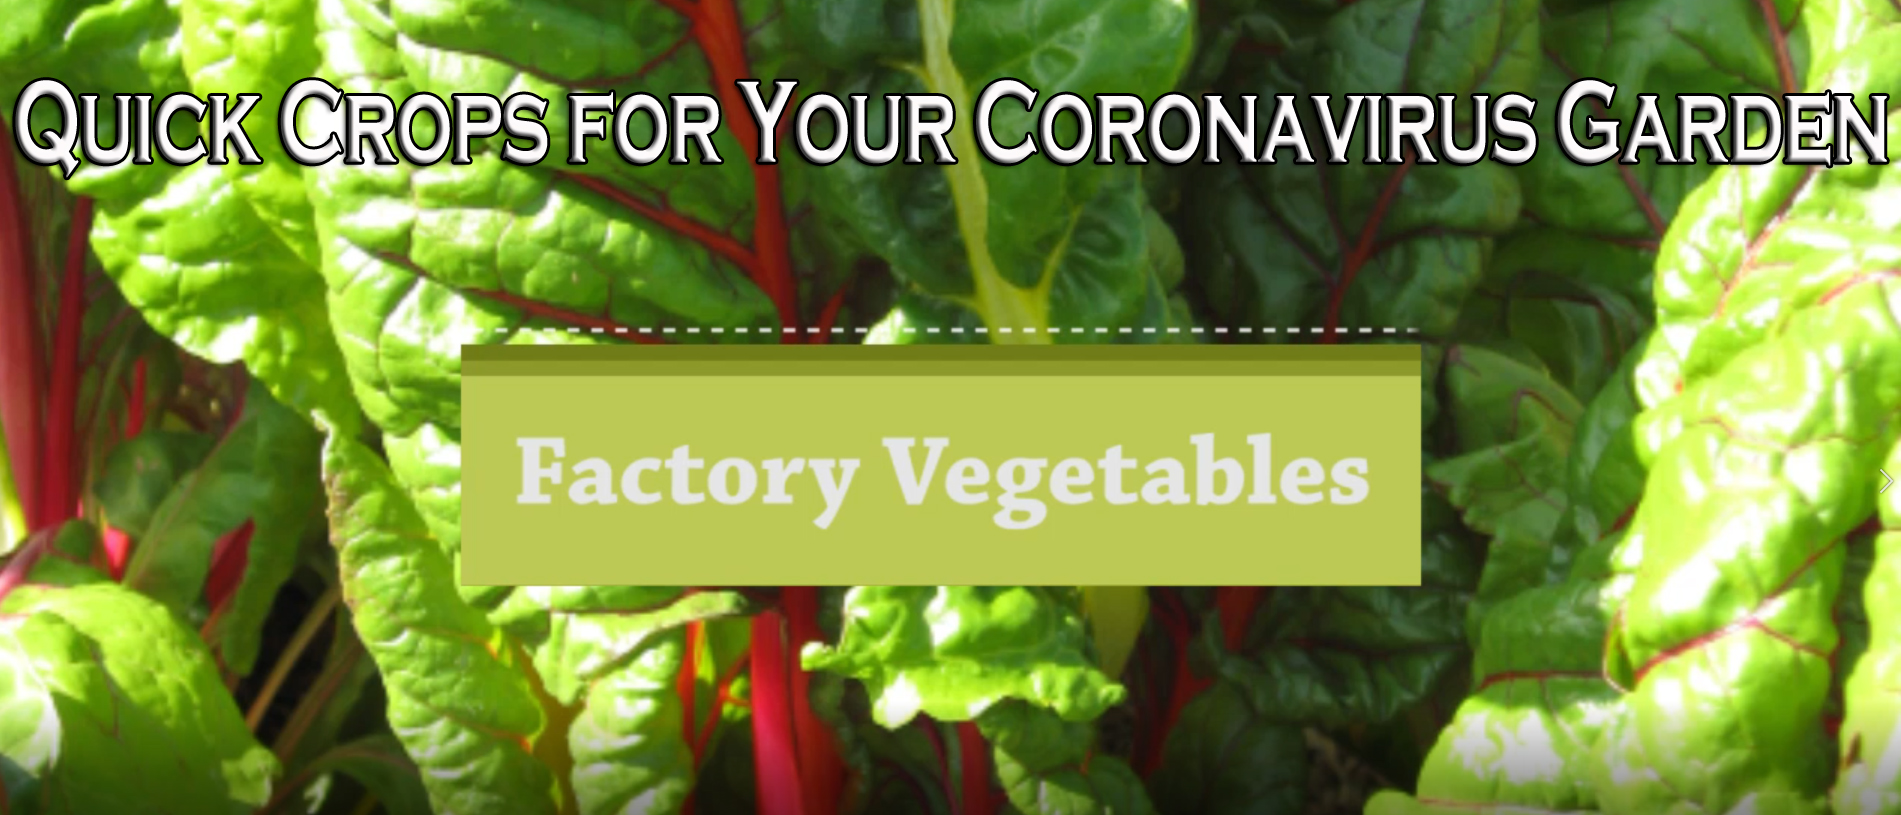 You are currently viewing YouTube – Quick Crops for a Coronavirus Garden